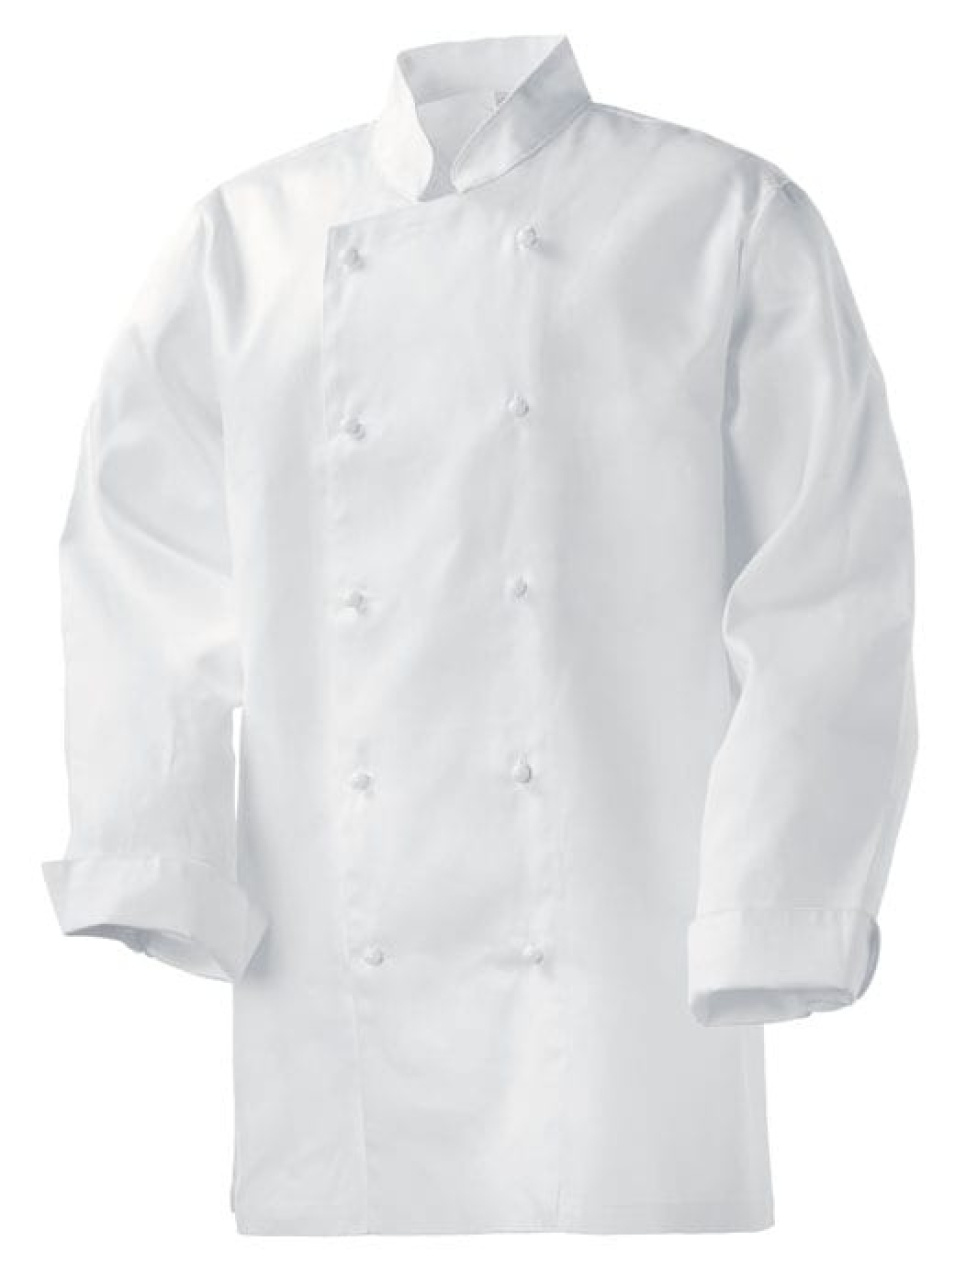 Gala Chef jacket, Ladies - Toni Lee in the group Cooking / Kitchen textiles / Chef jackets at KitchenLab (1607-18468)